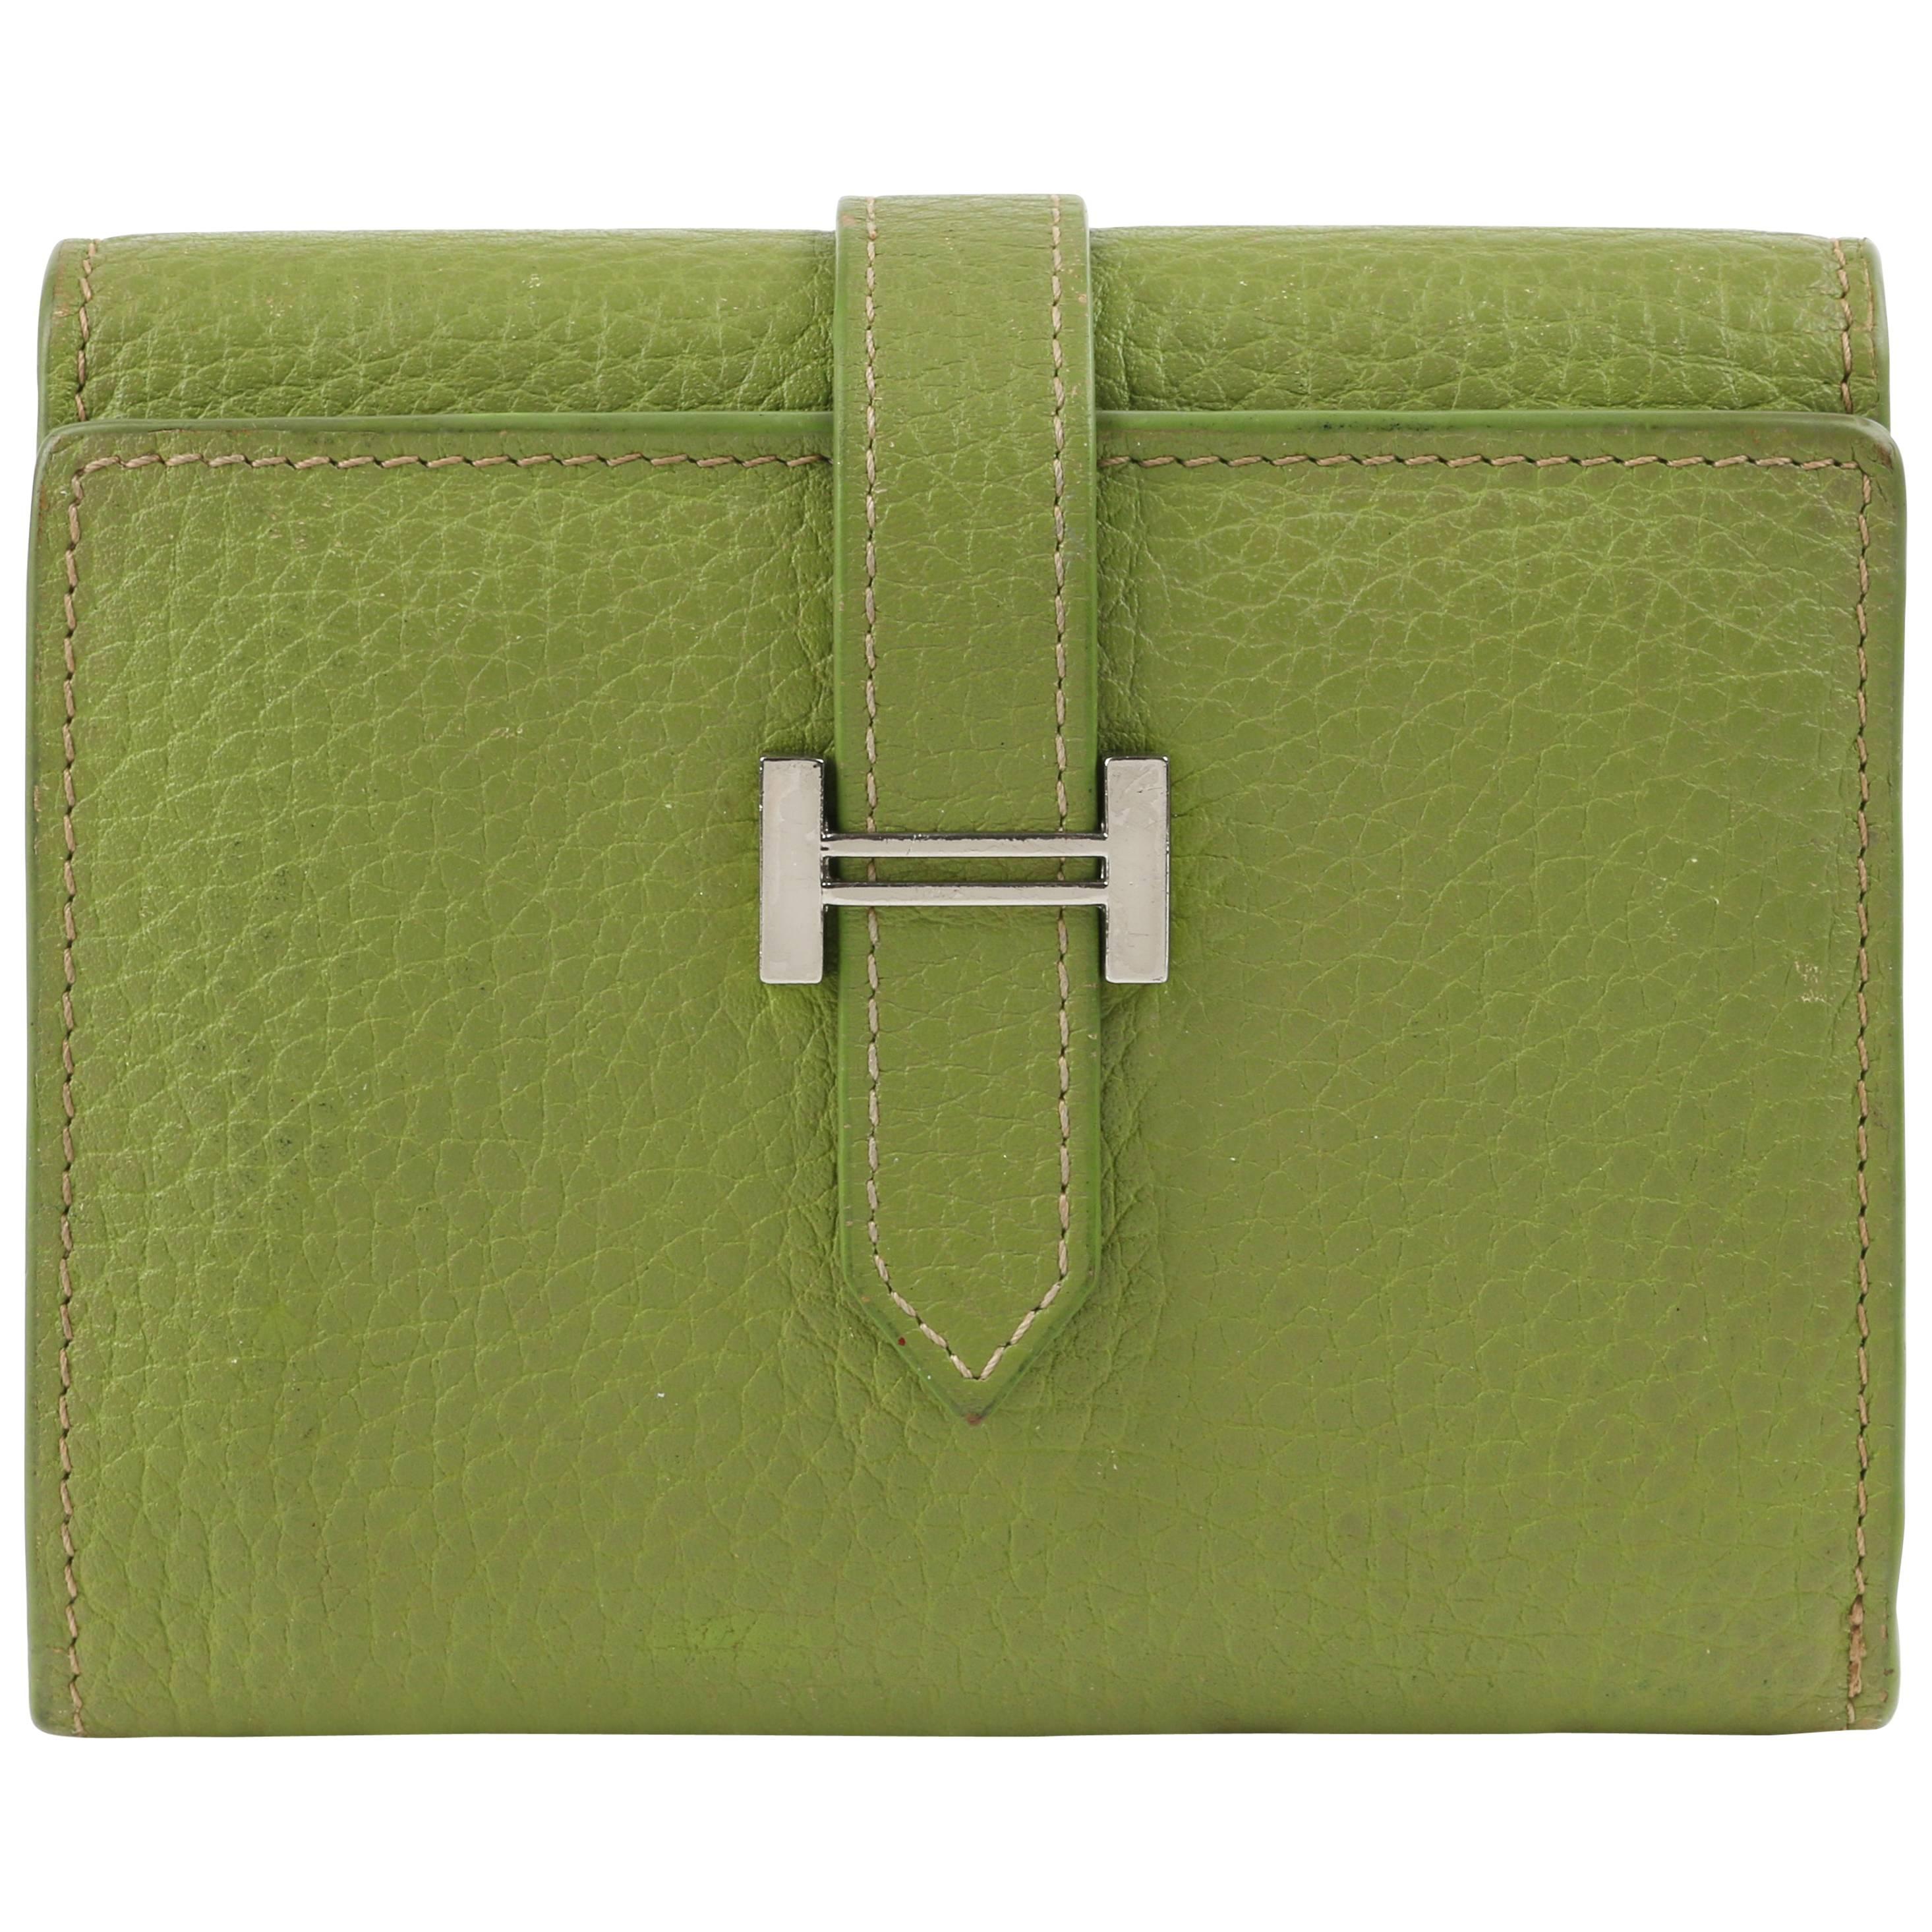 HERMES Lime Green Pebbled Leather "H" Logo Closure Tri-fold Wallet